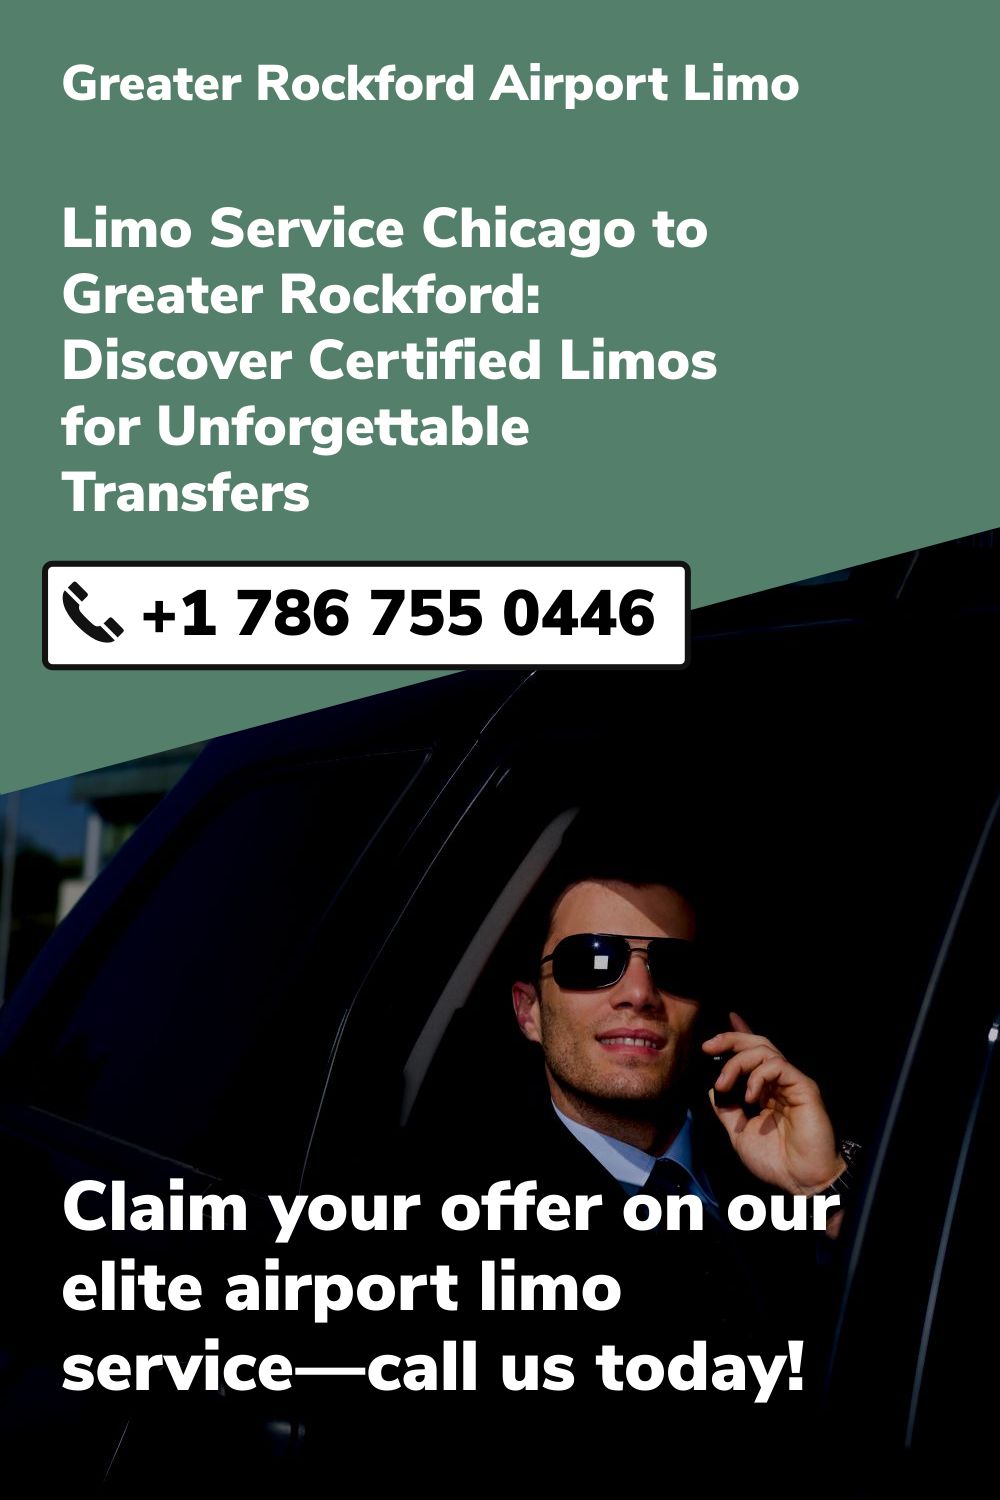 Greater Rockford Airport Limo